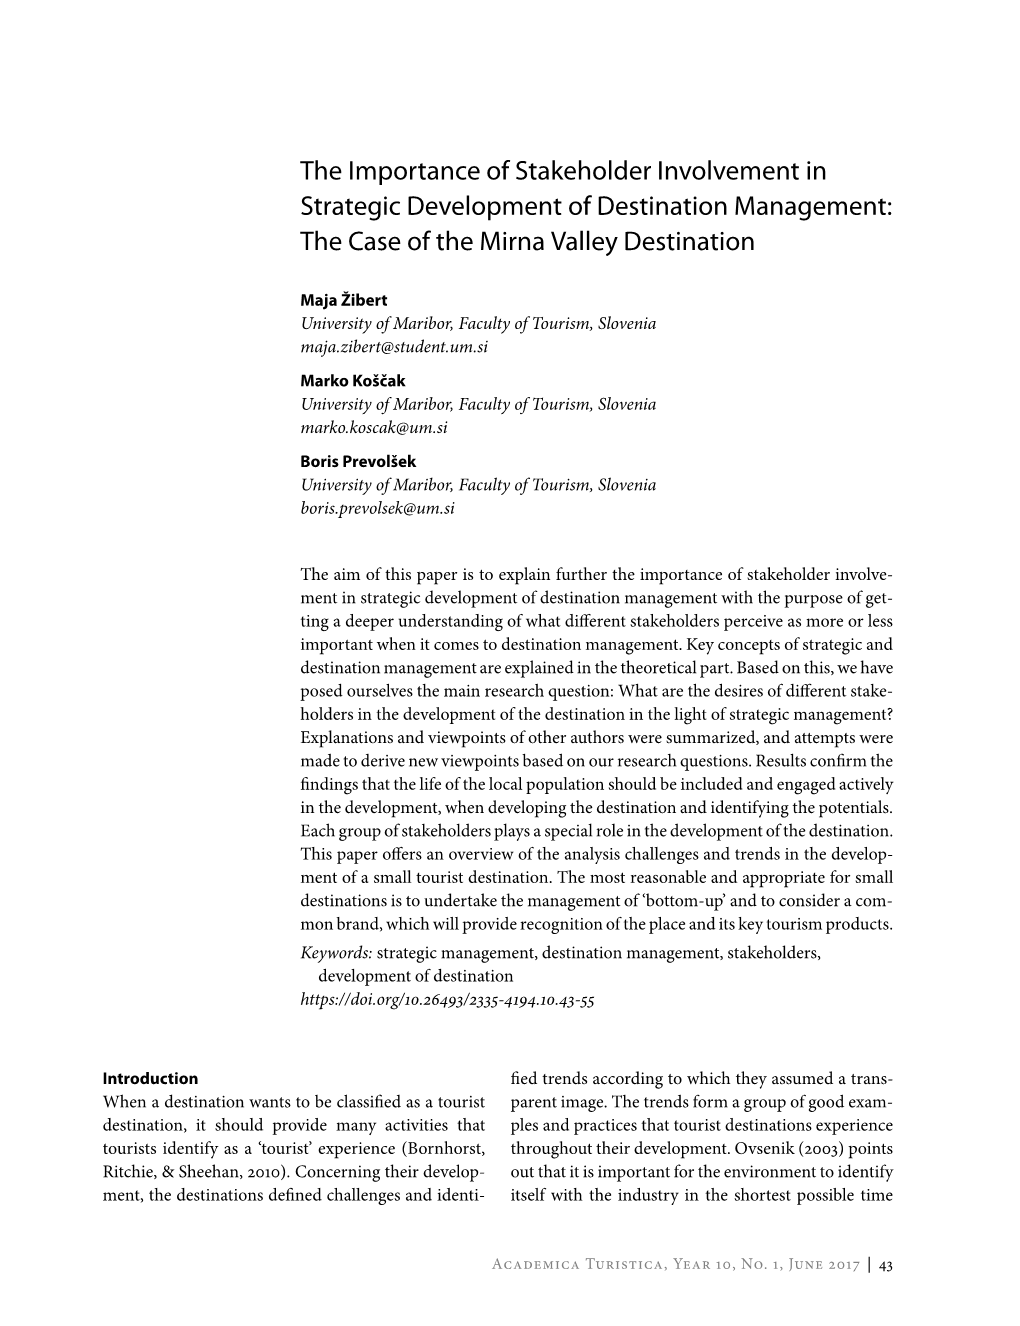 The Importance of Stakeholder Involvement in Strategic Development of Destination Management: the Case of the Mirna Valley Destination